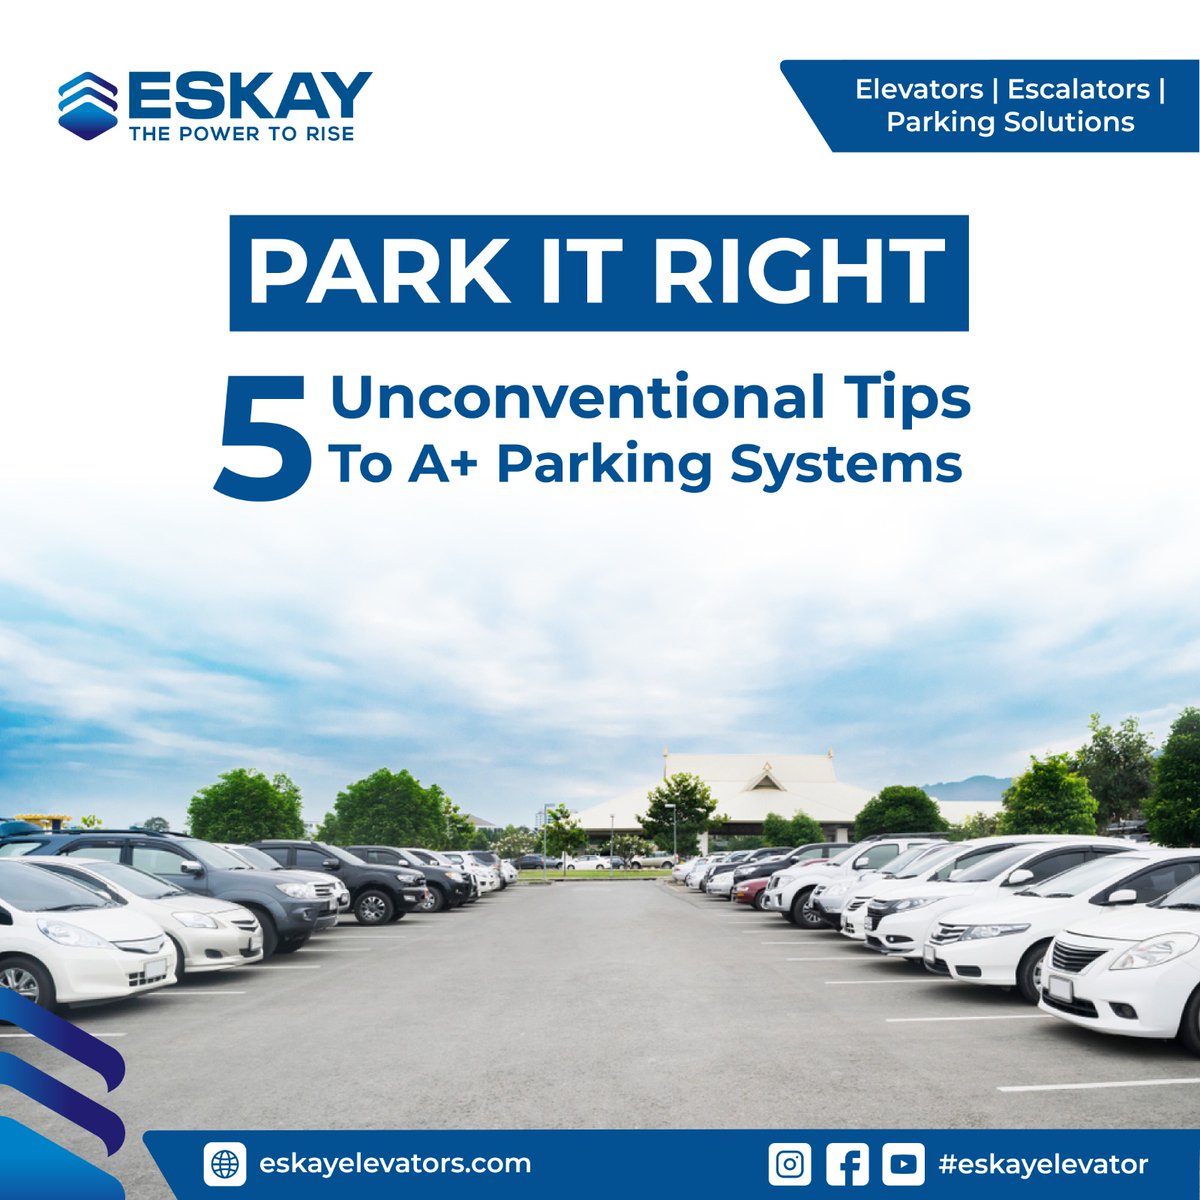 Parking systems giving you a headache? 

Eskay Elevators delivers seamless solutions for stress-free parking experiences.

tinyurl.com/mrxmrrks

#EskayElevators #ParkingSolutions  #SmartParking #EfficientParking #ParkingManagement #SeamlessParking #InnovationInParking